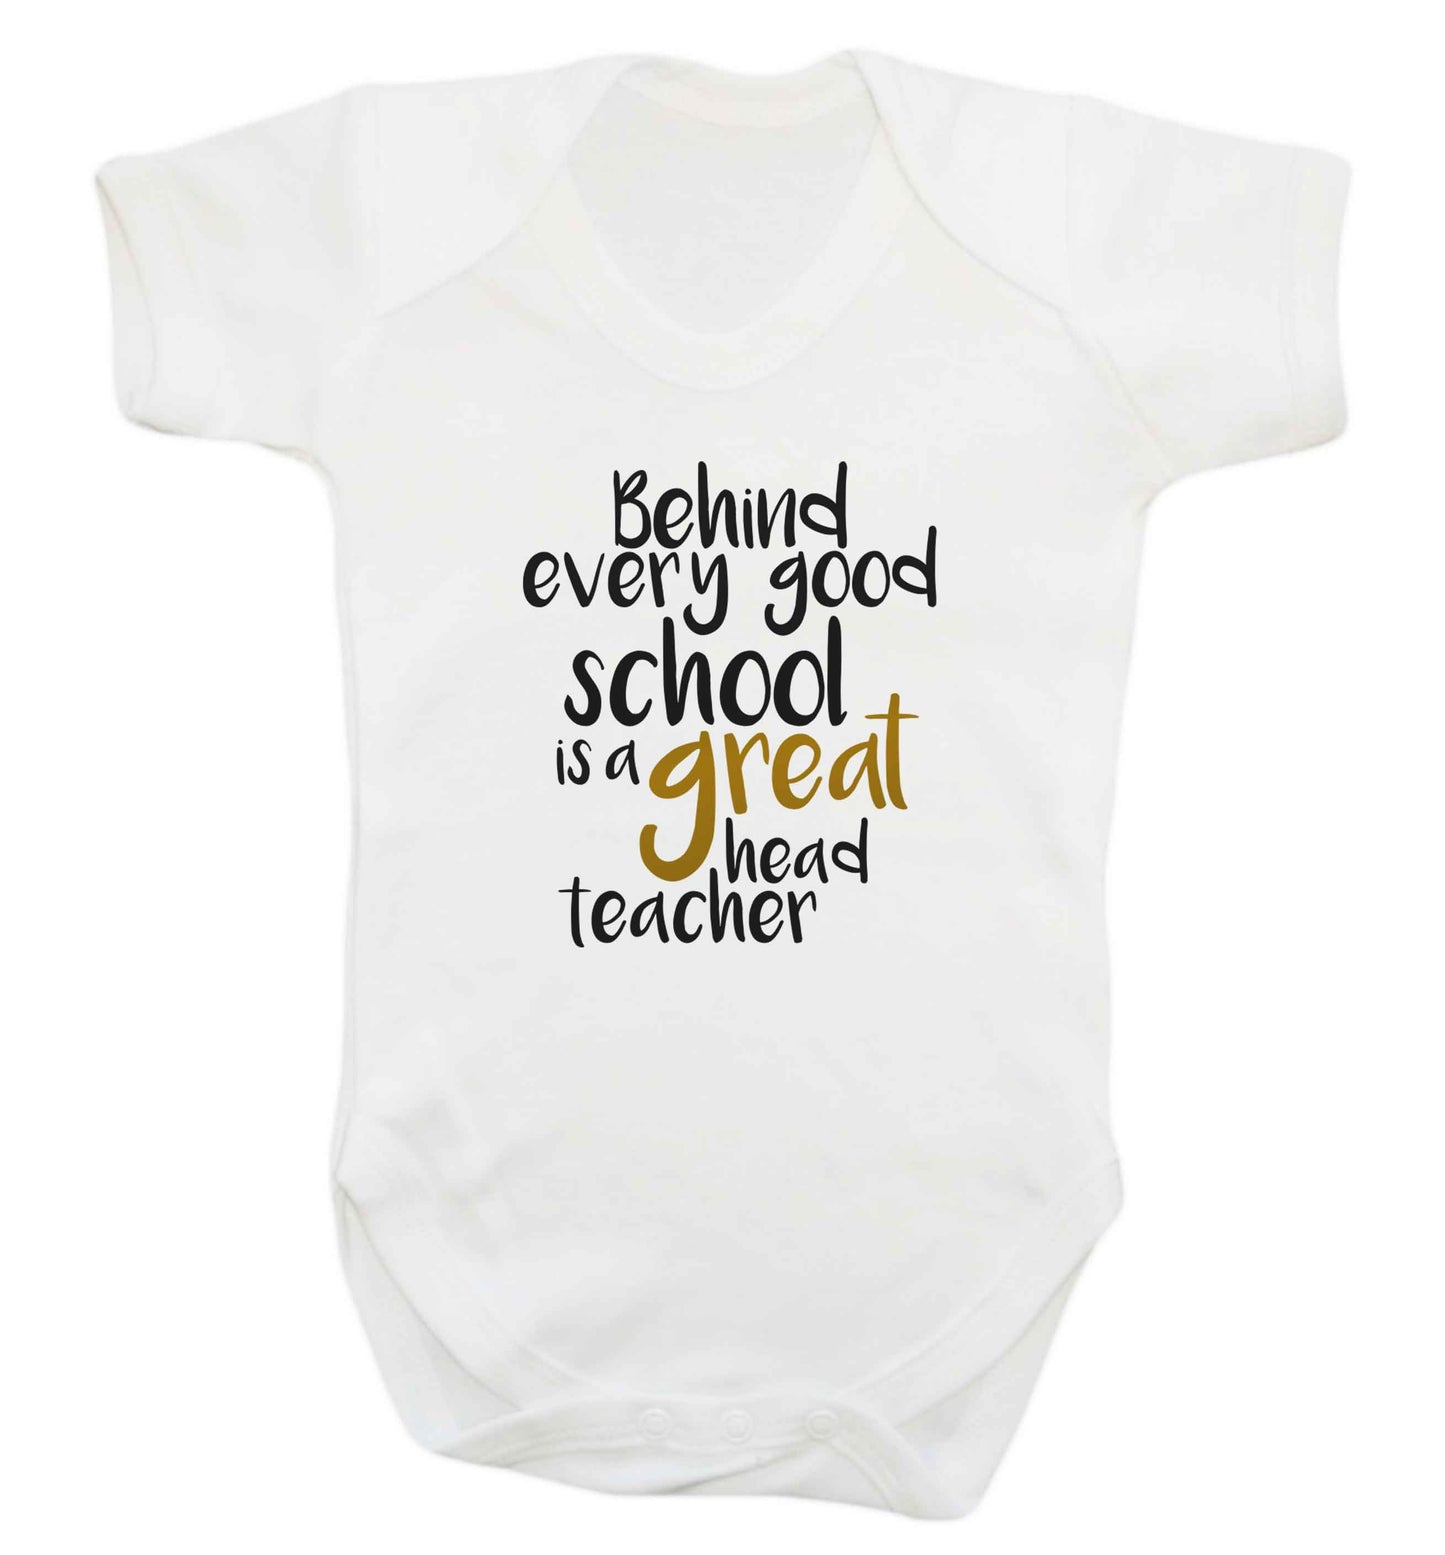 Behind every good school is a great head teacher baby vest white 18-24 months